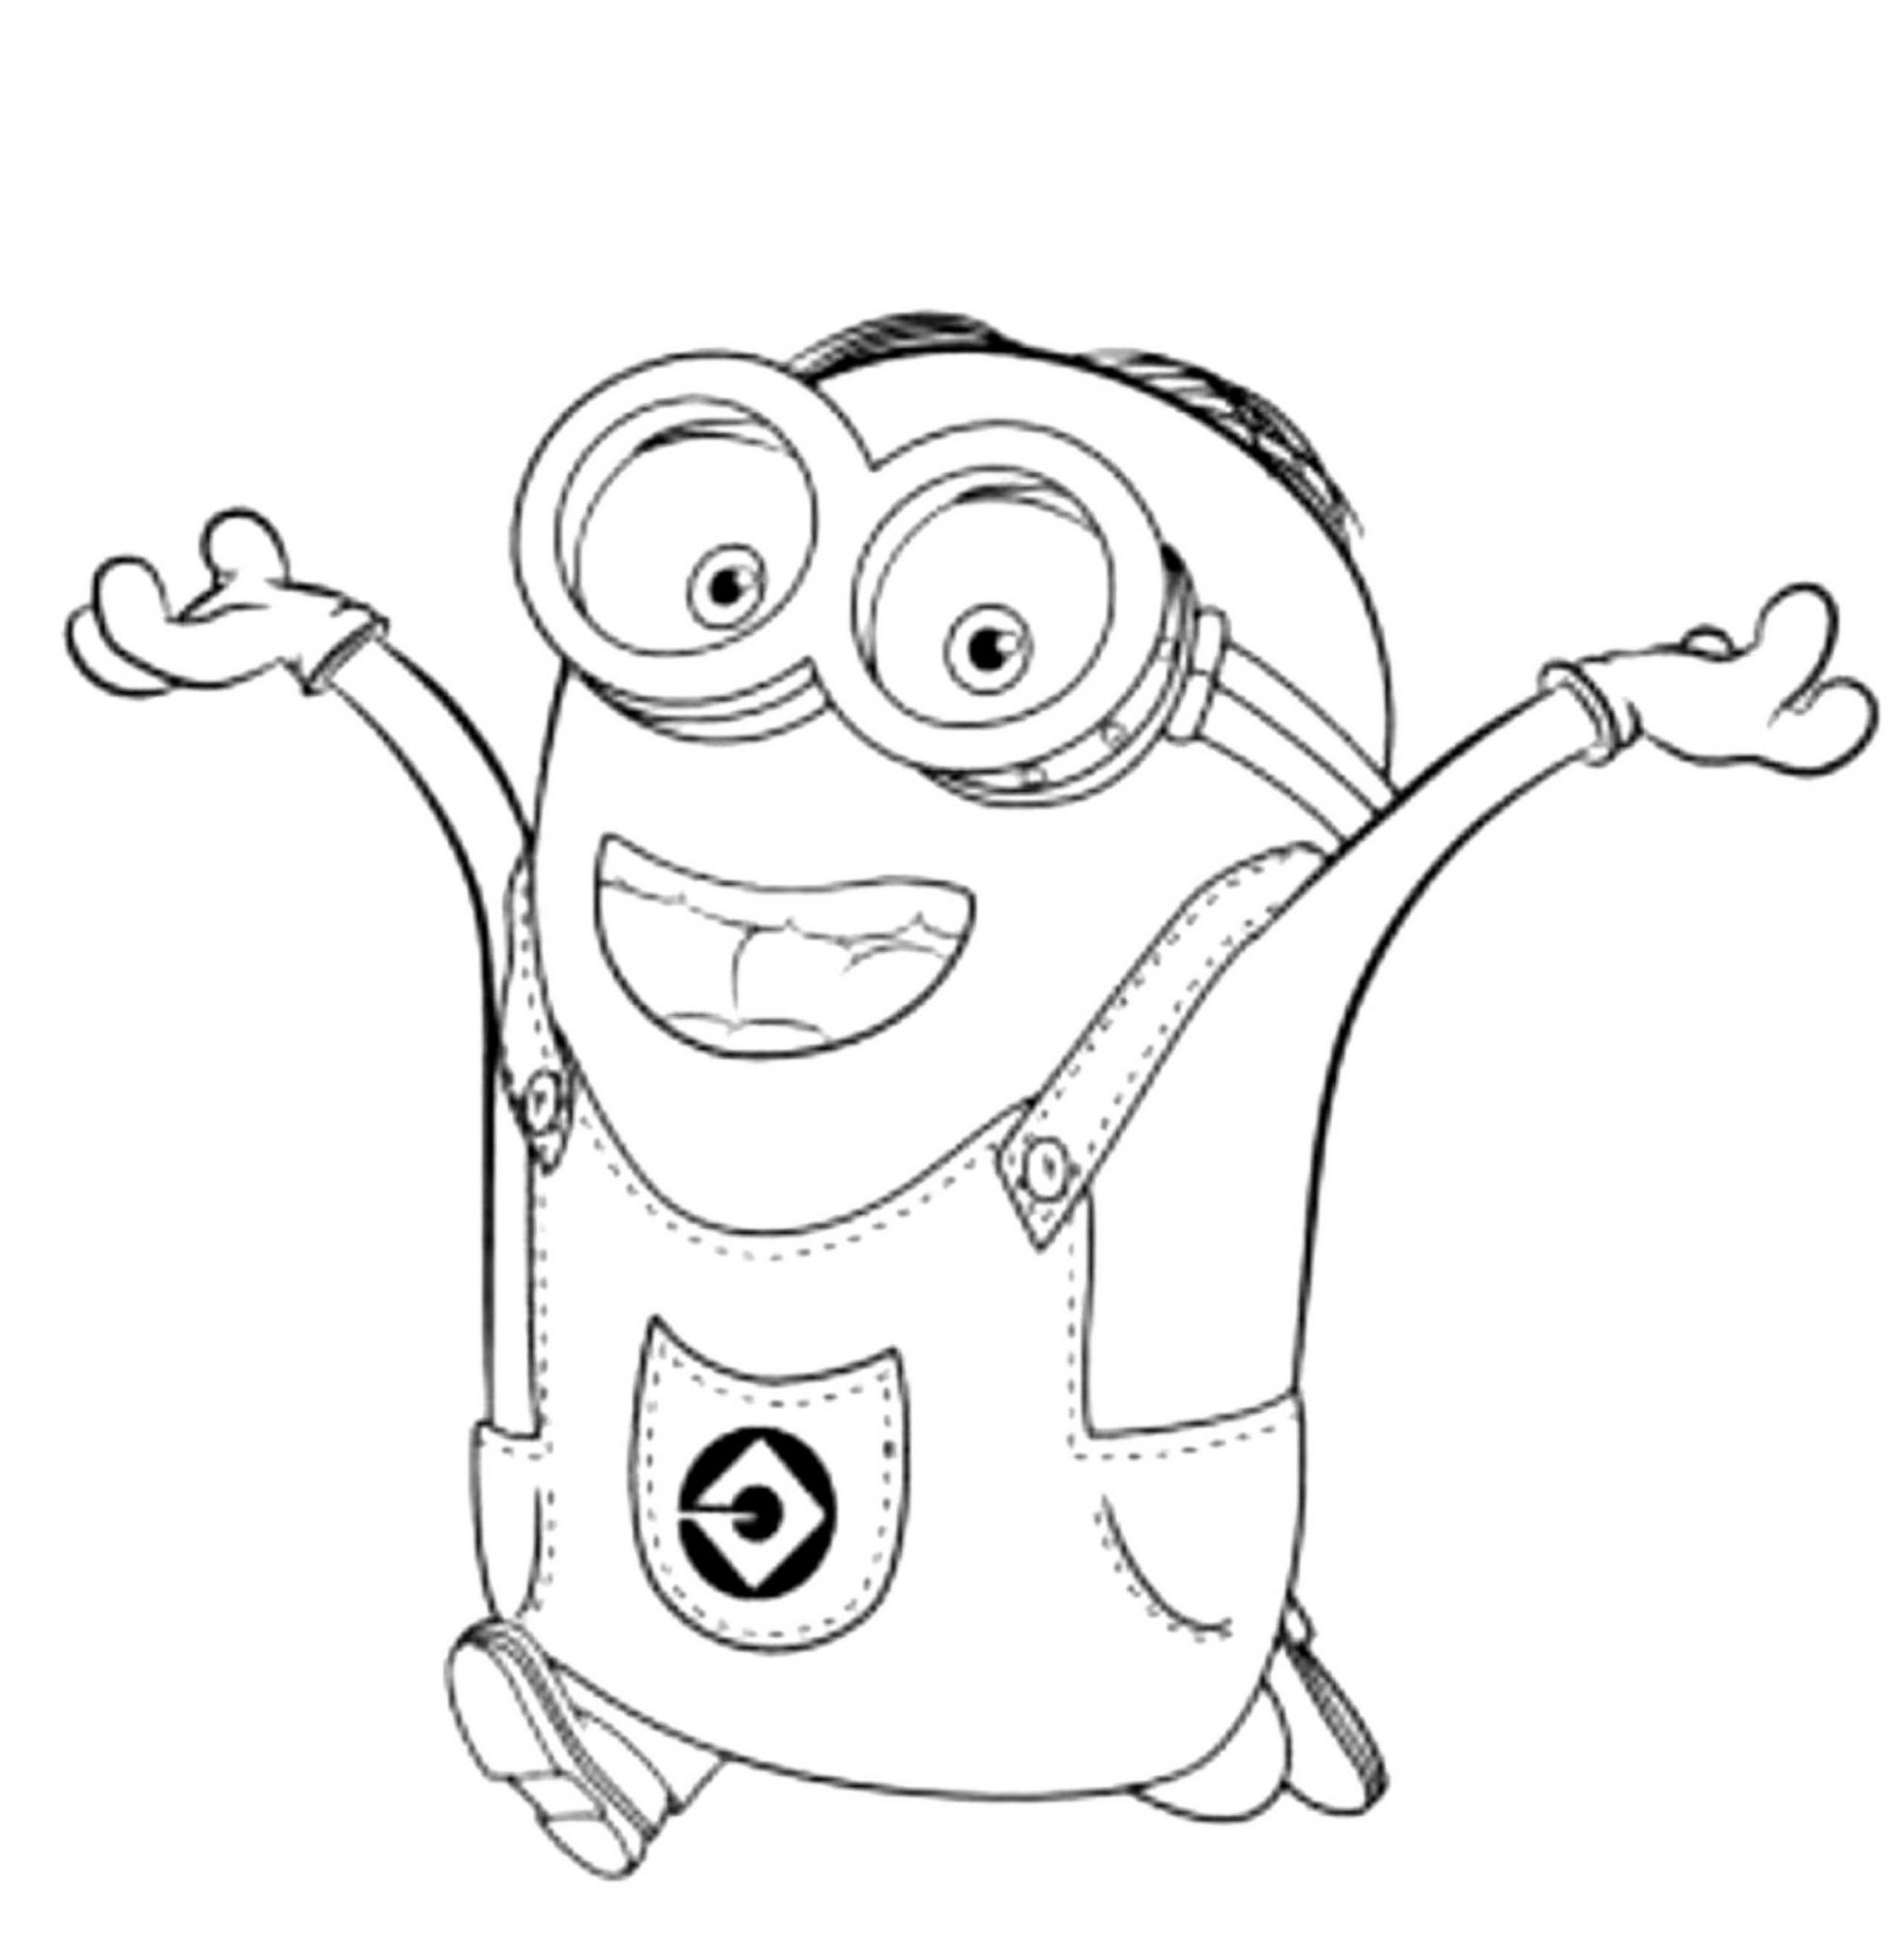 Print Download Minion Coloring Pages for Kids to Have Fun